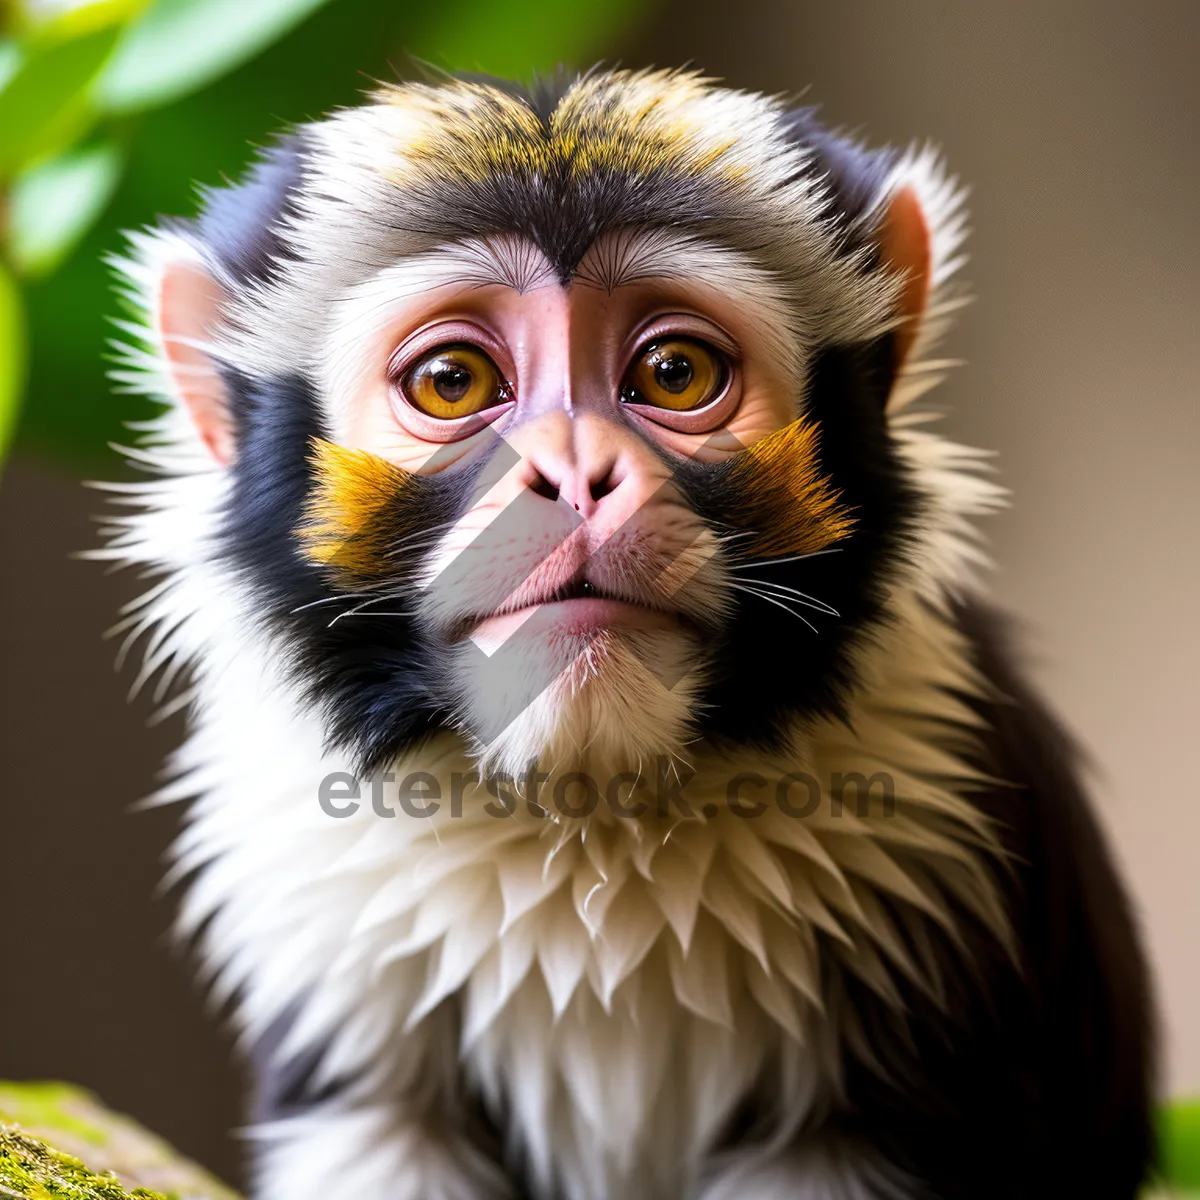 Picture of Furry Baby Primate with Cute Cat-Like Eyes